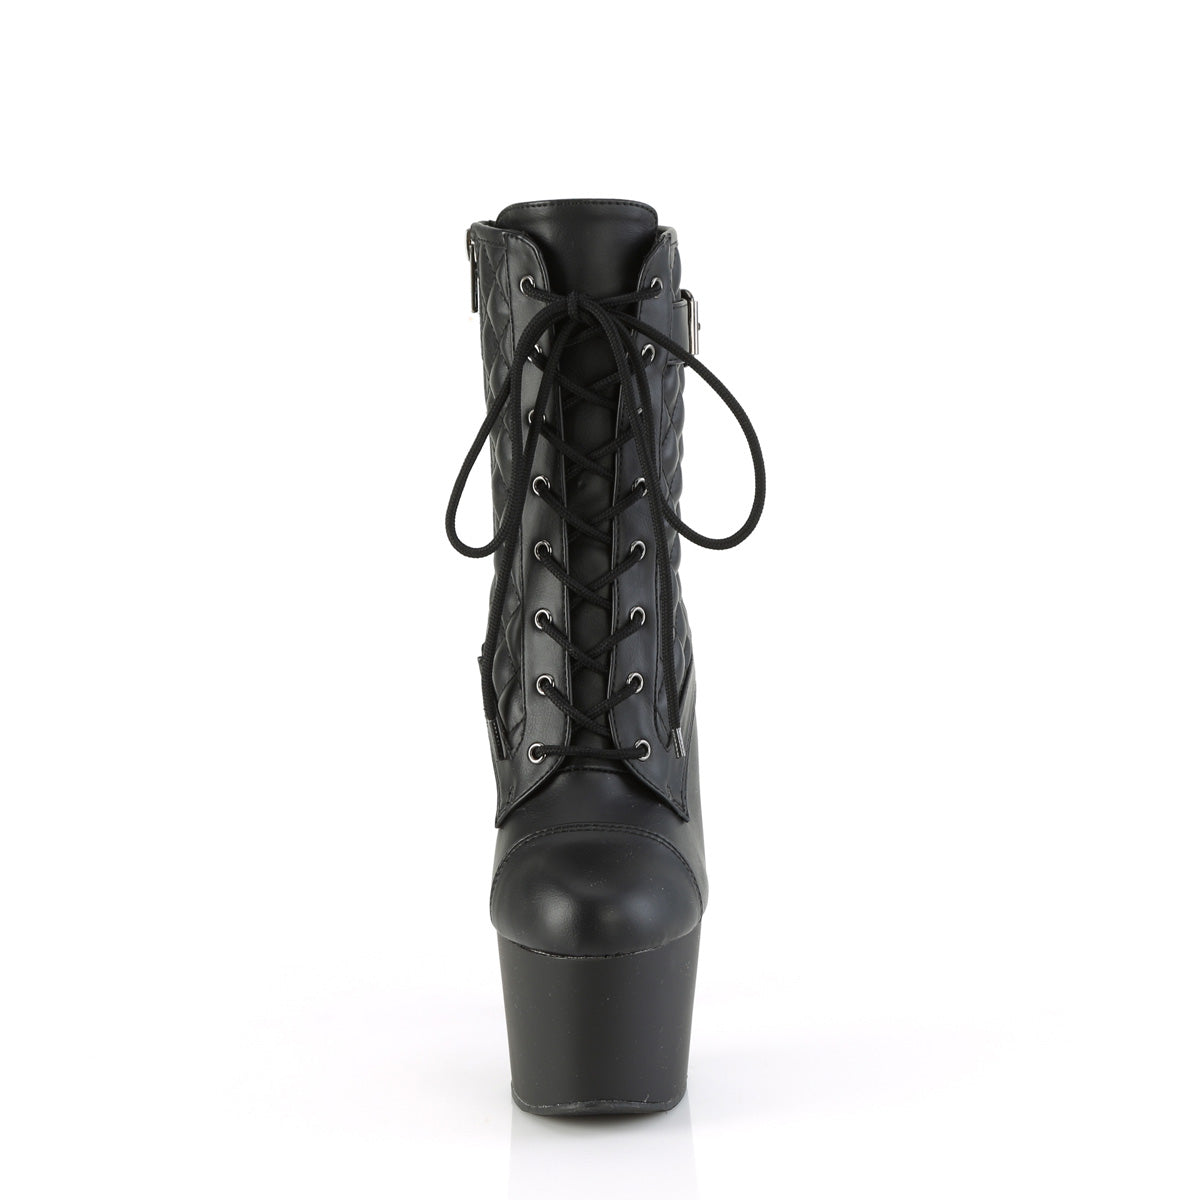 ADORE-1033 Buckled Lace-Up Ankle Boot  Multi view 4